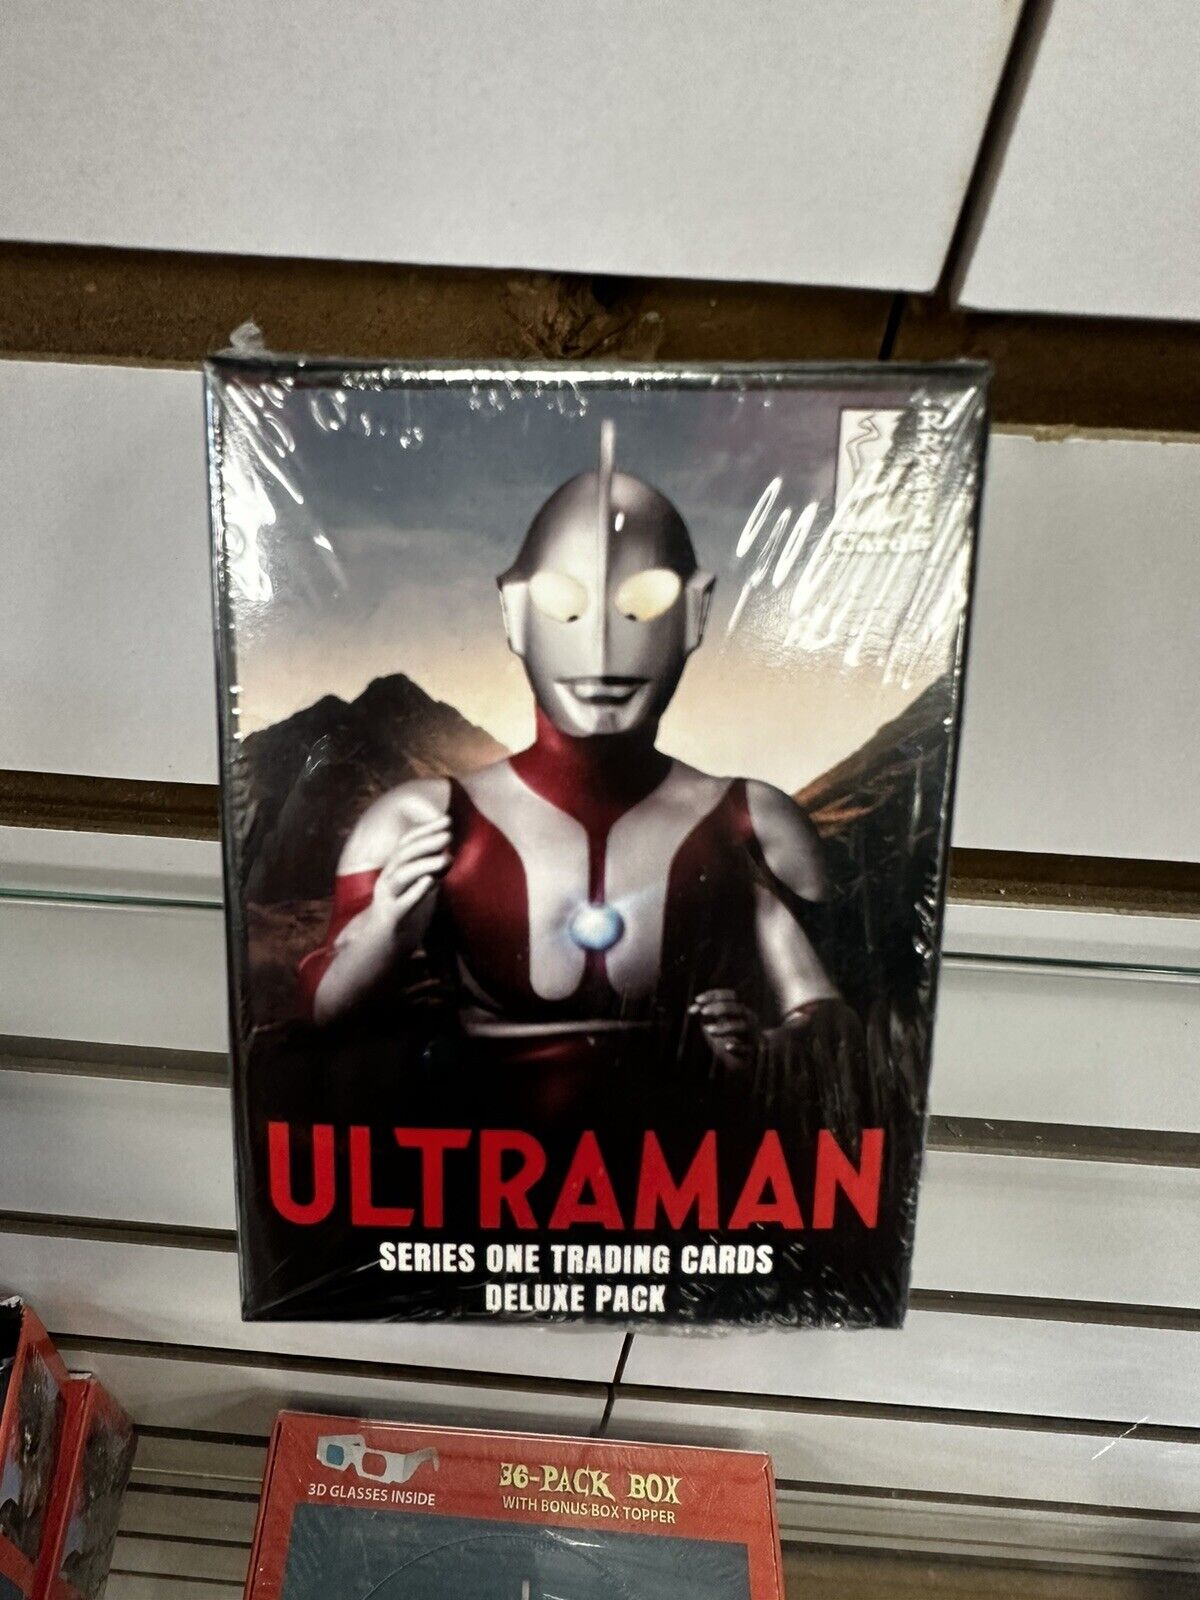 Ultraman Series One Trading Cards Deluxe Pack RRParks Cards Factory Sealed